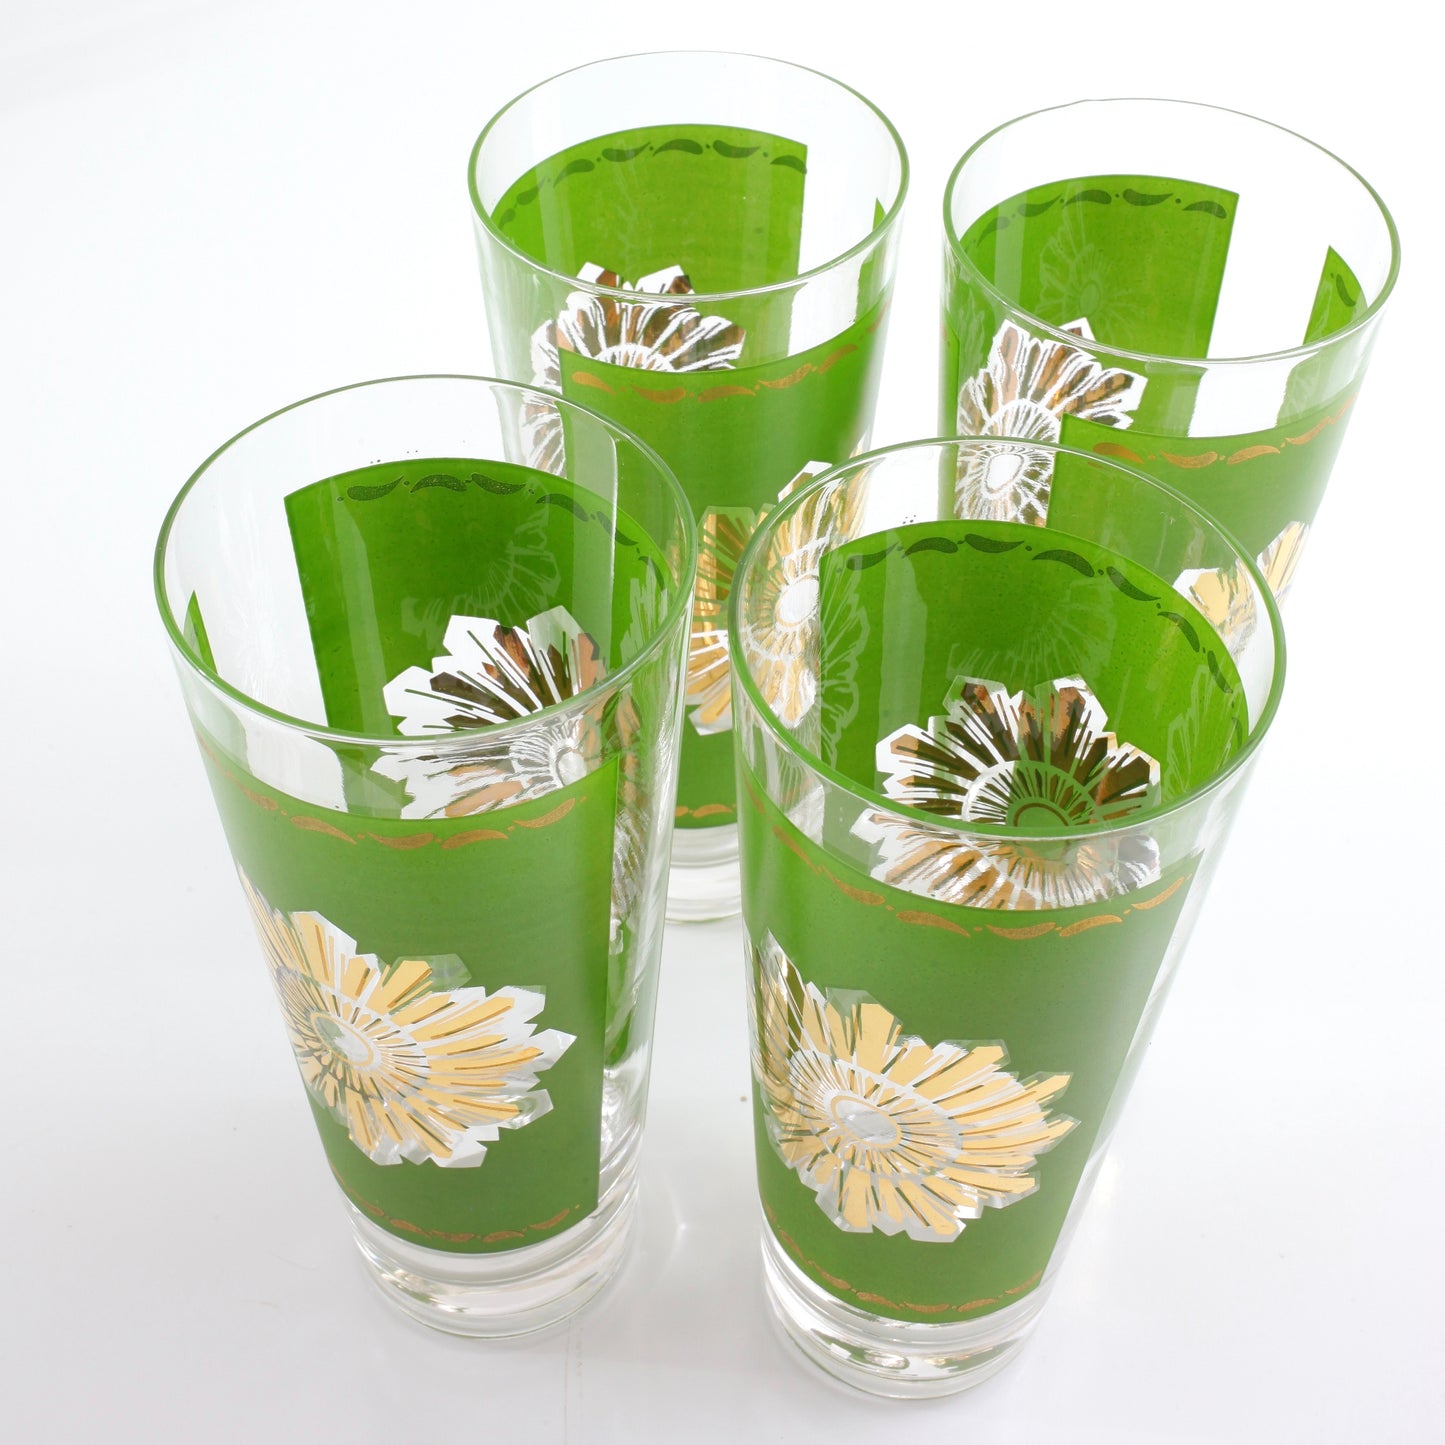 SOLD - Mid Century Modern Green & Gold Starburst Glasses by Federal Glass